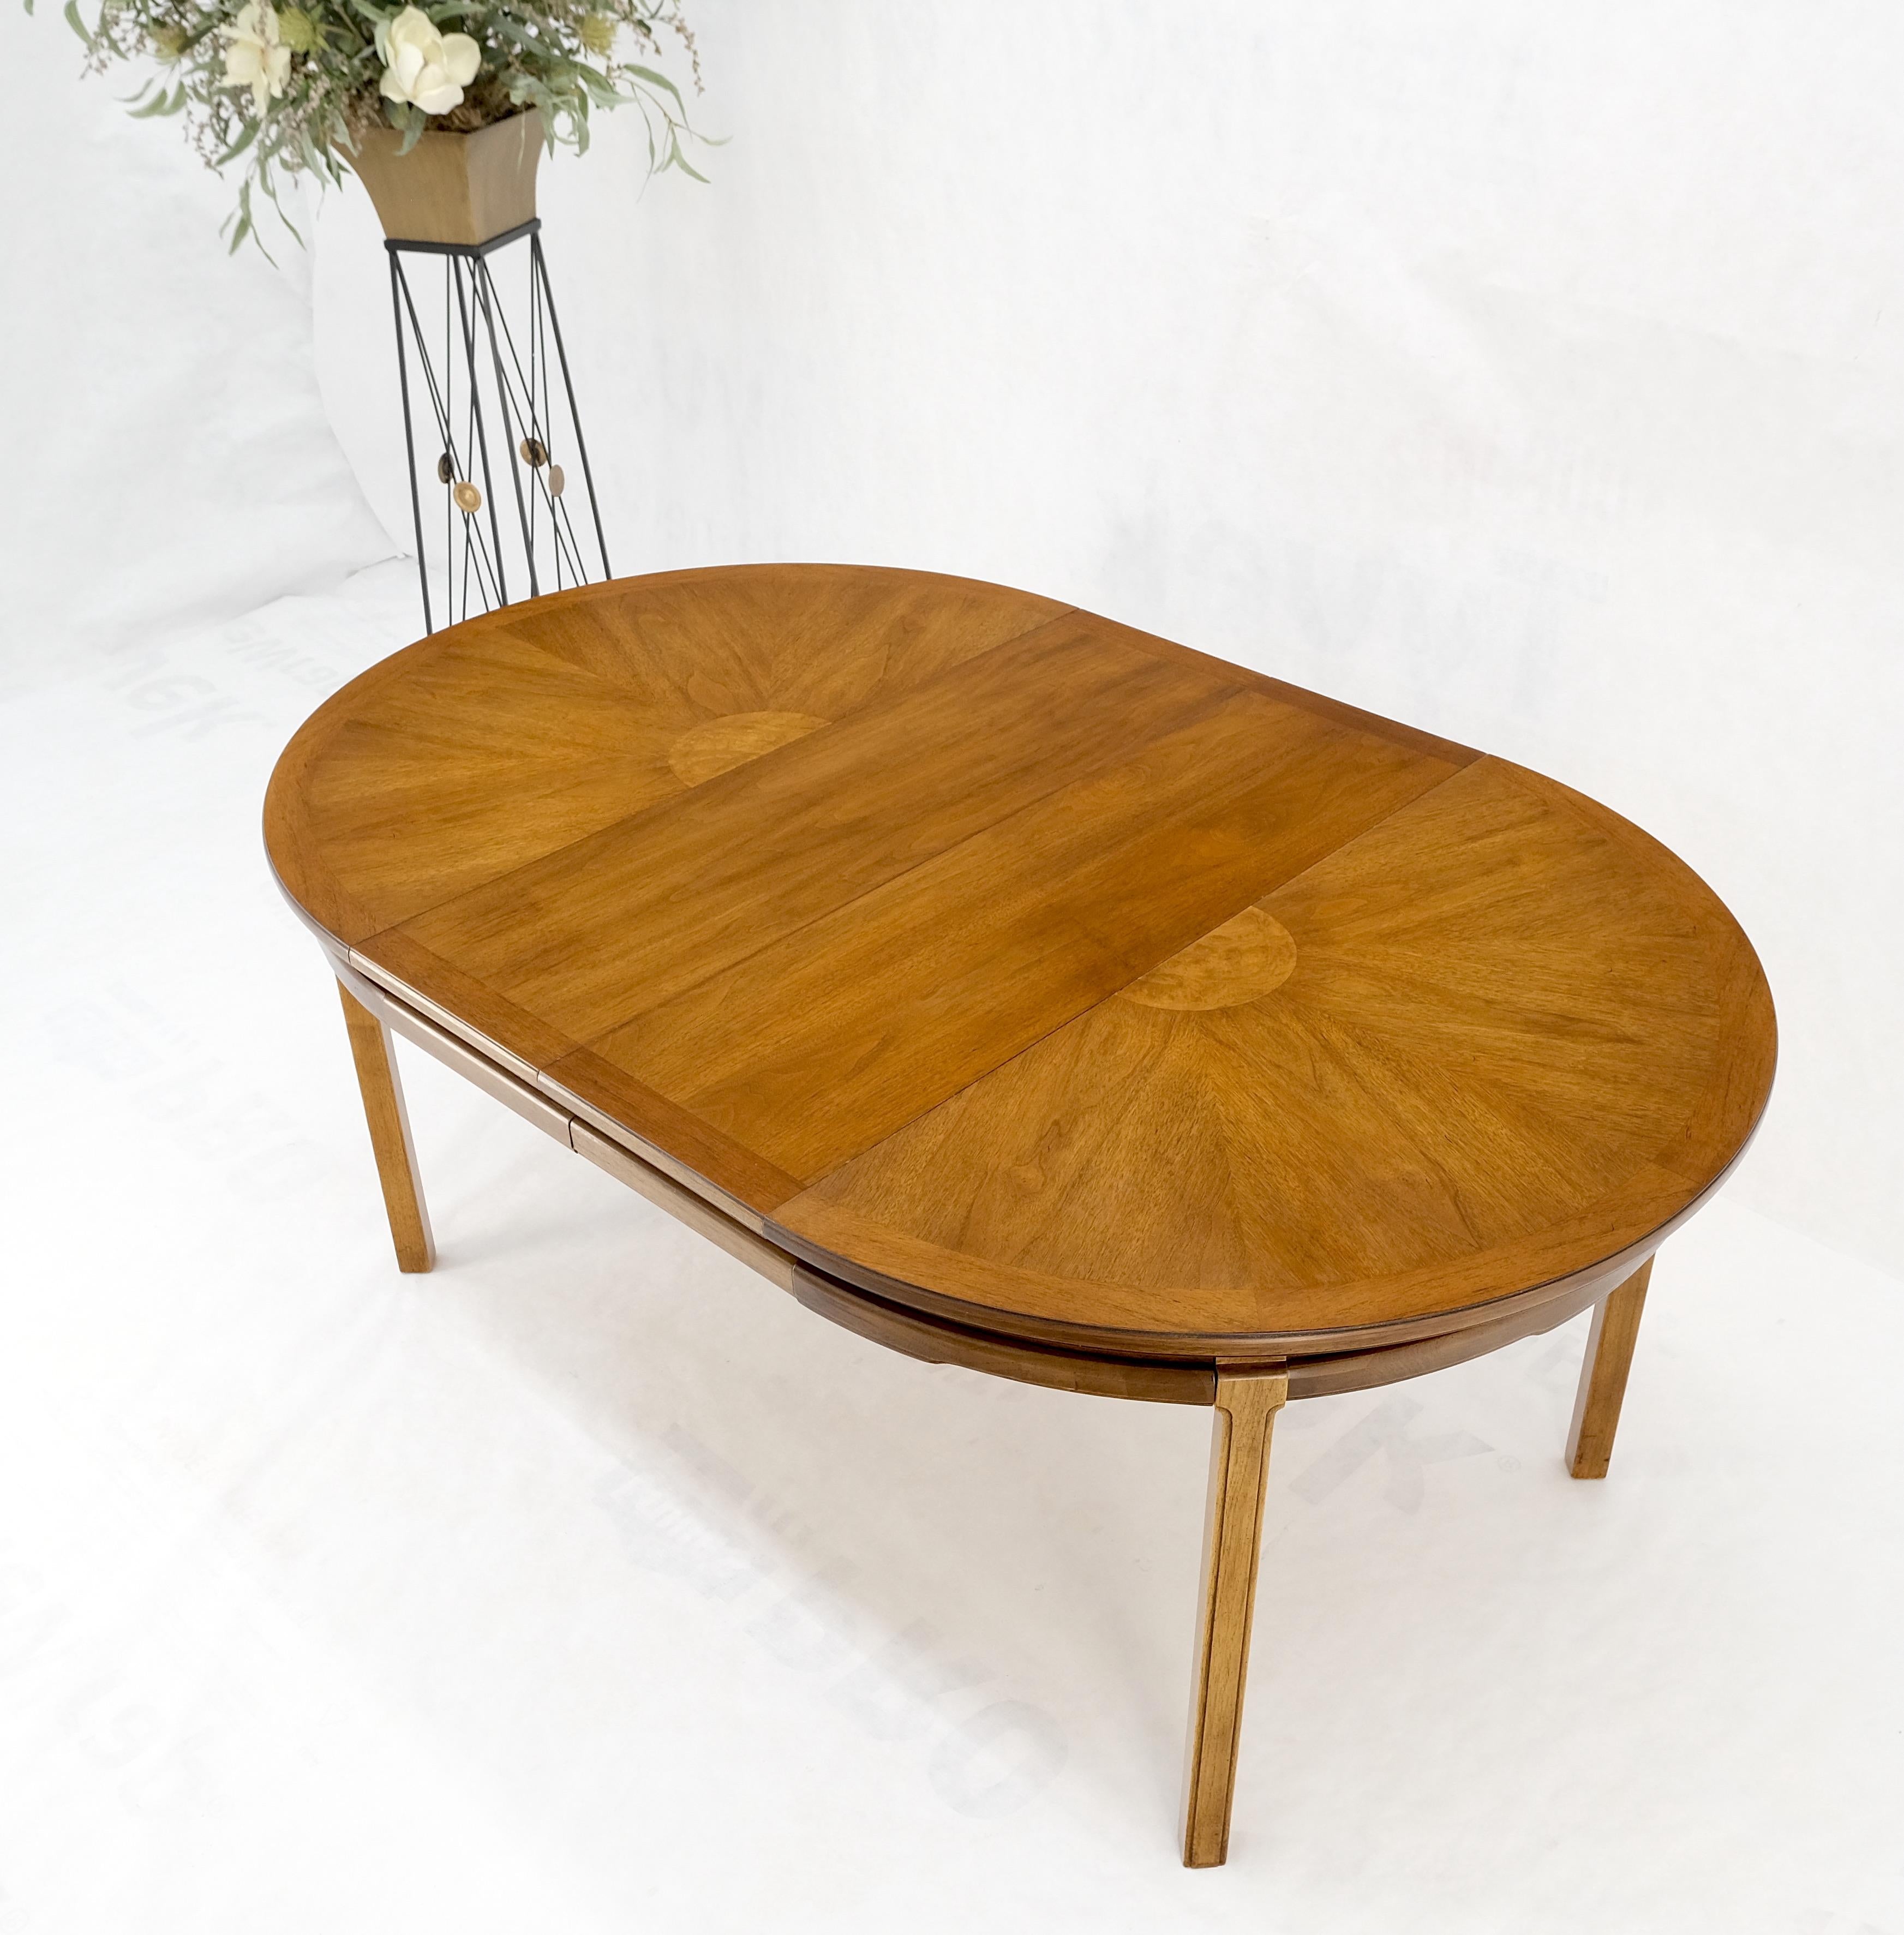 Round Sunburst Pattern Mid-Century Modern Dining Table with Two Leaves Mint For Sale 4